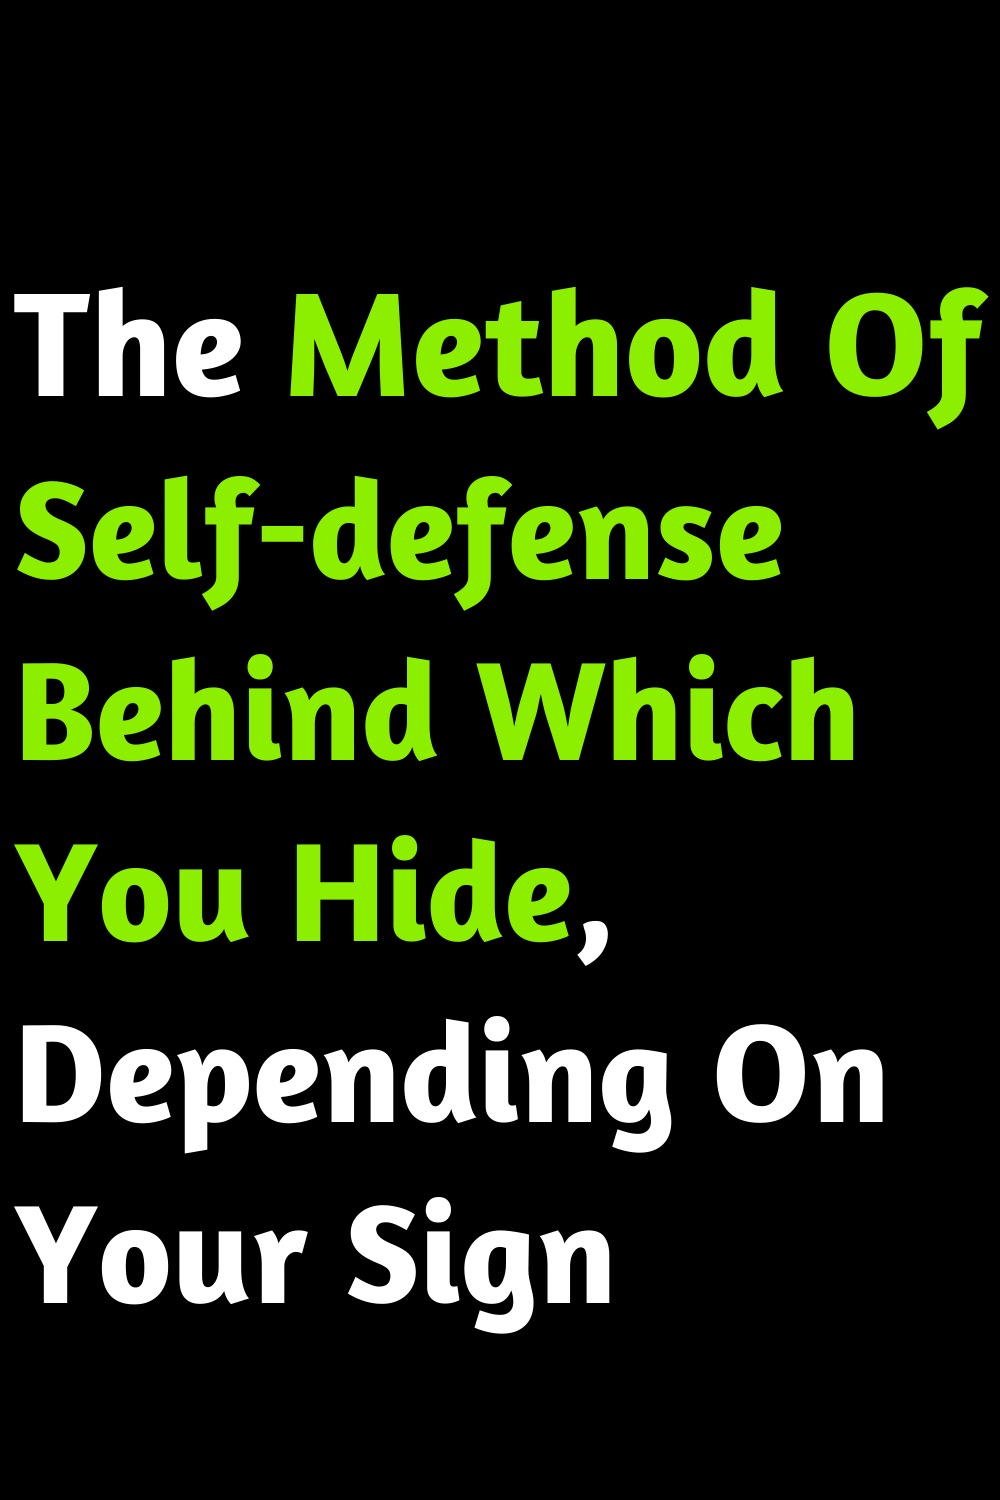 The Method Of Self-defense Behind Which You Hide, Depending On Your Sign